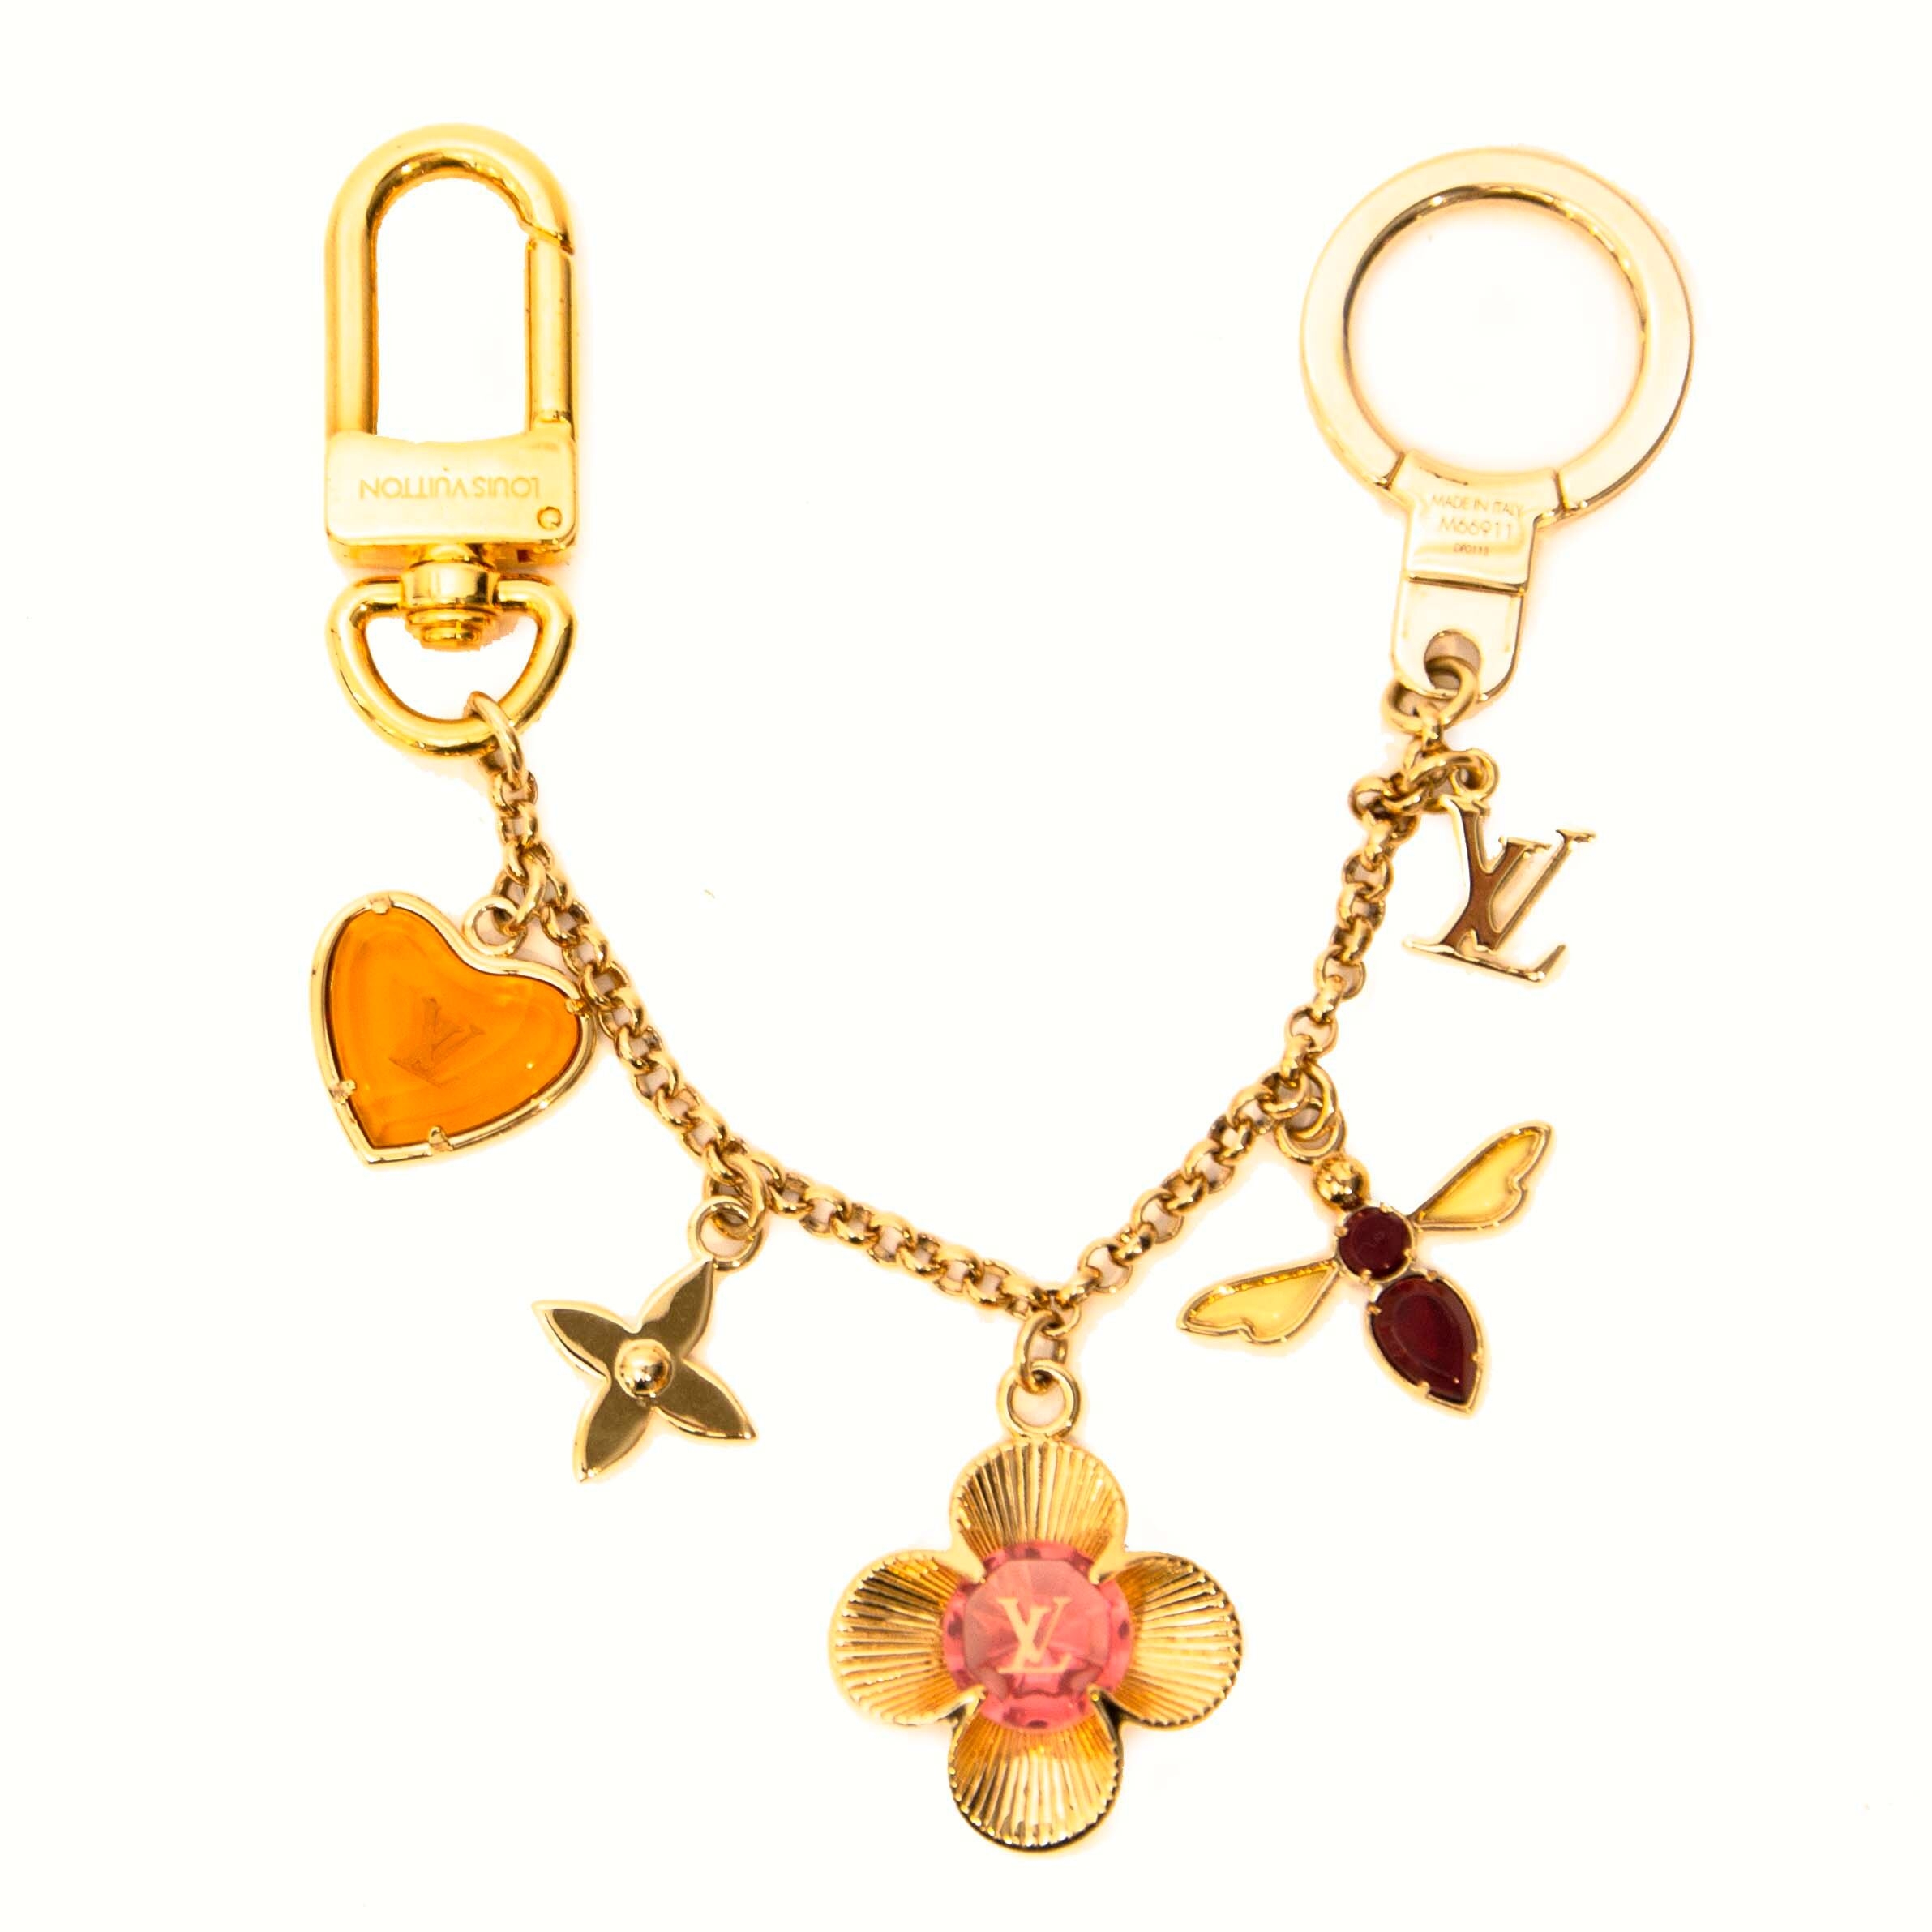 Louis Vuitton BLOOMING FLOWERS BB BAG CHARM AND KEY HOLDER 5 inches/13cm  M63085